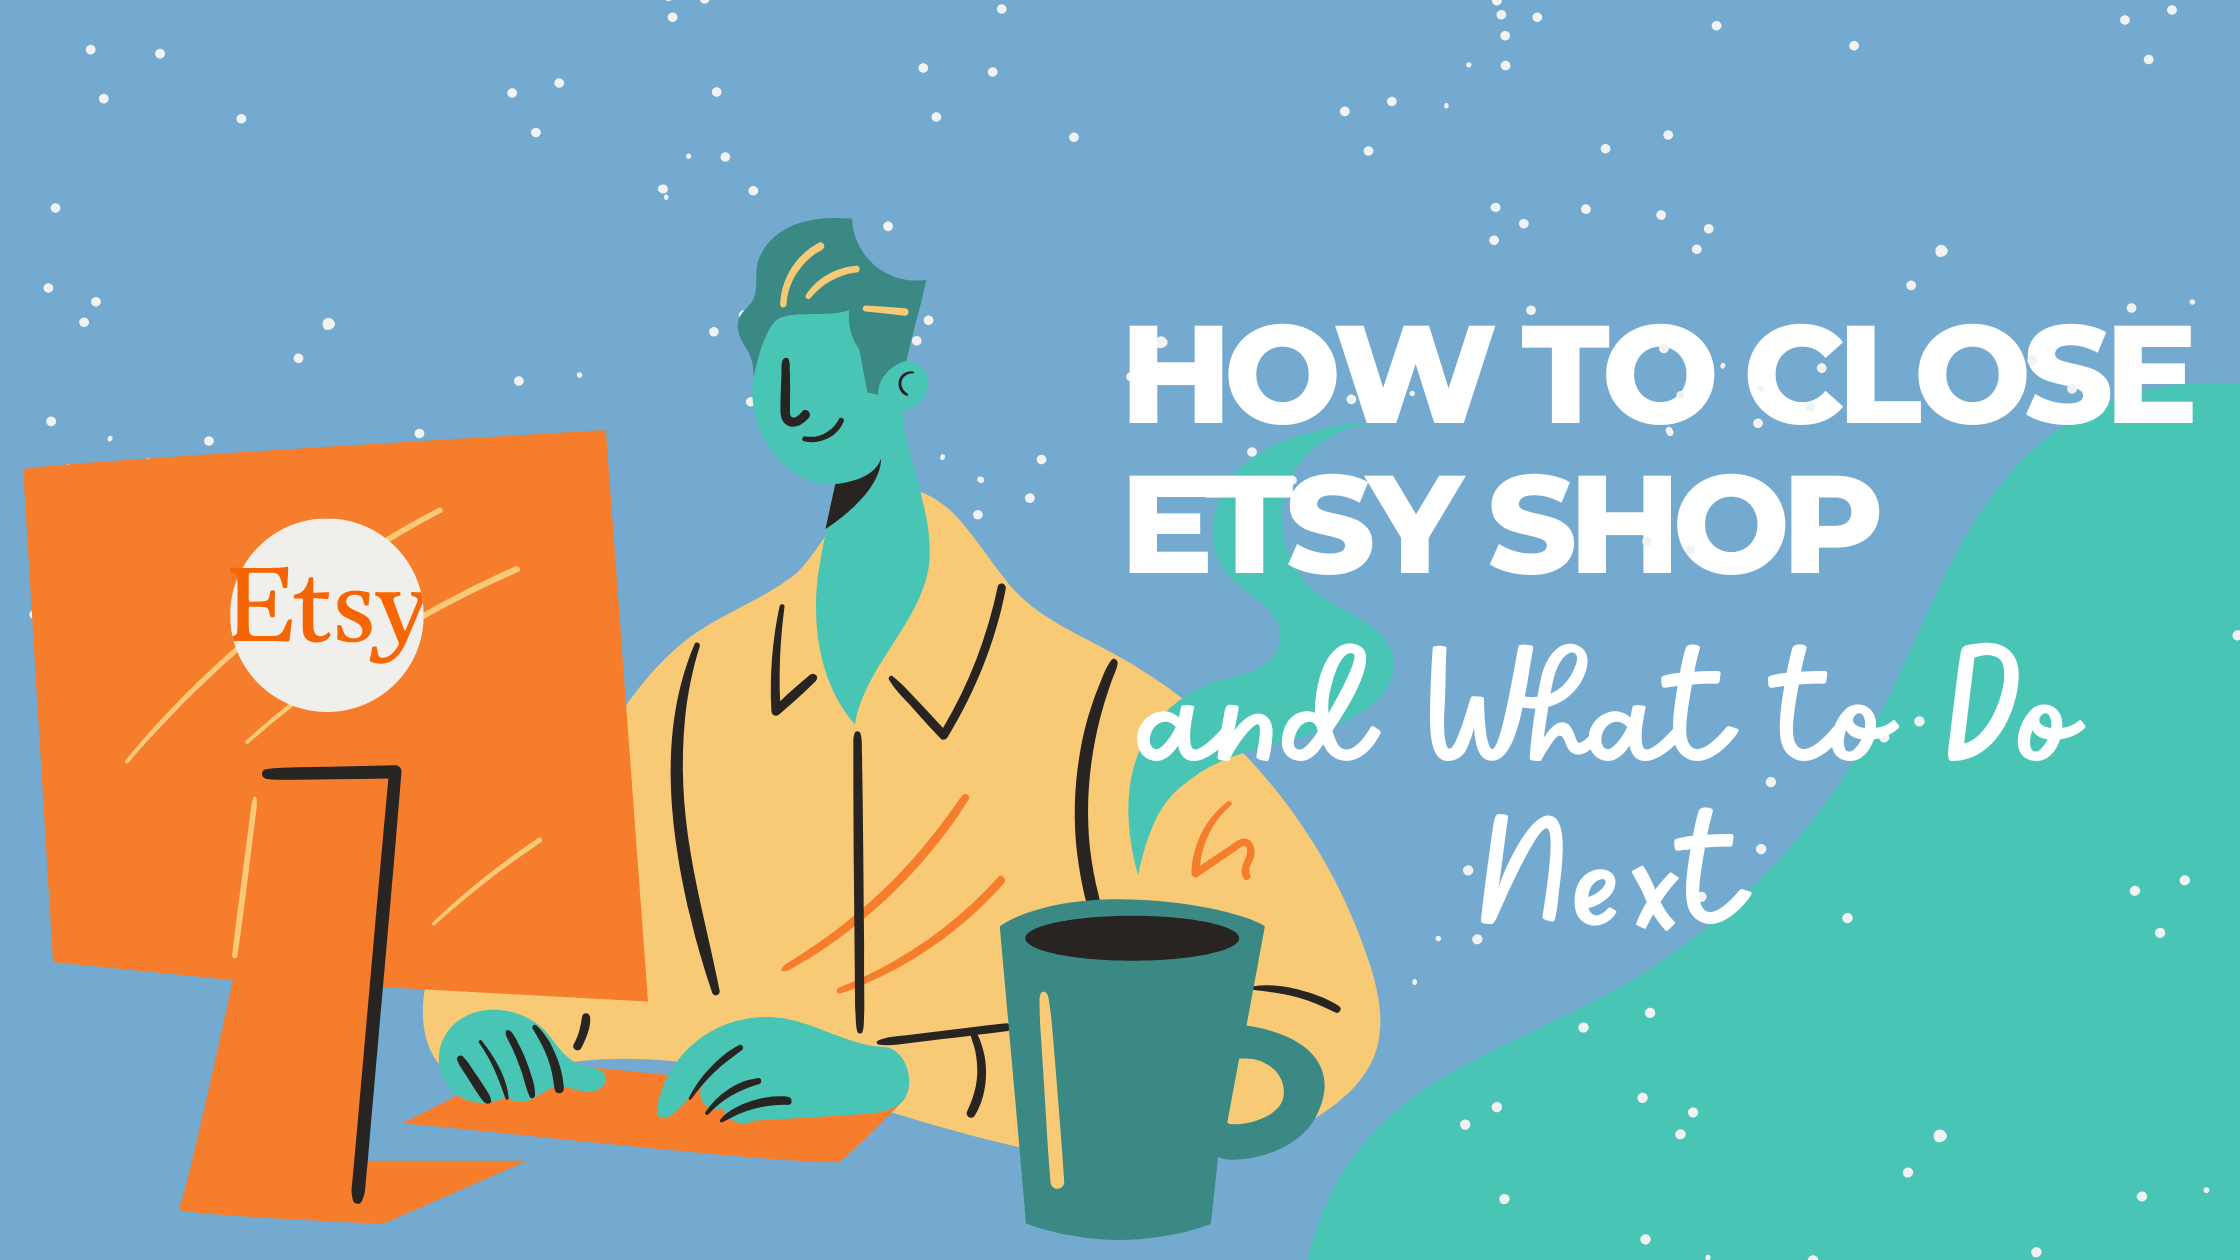 How to Close Etsy Shop and What to Do Next